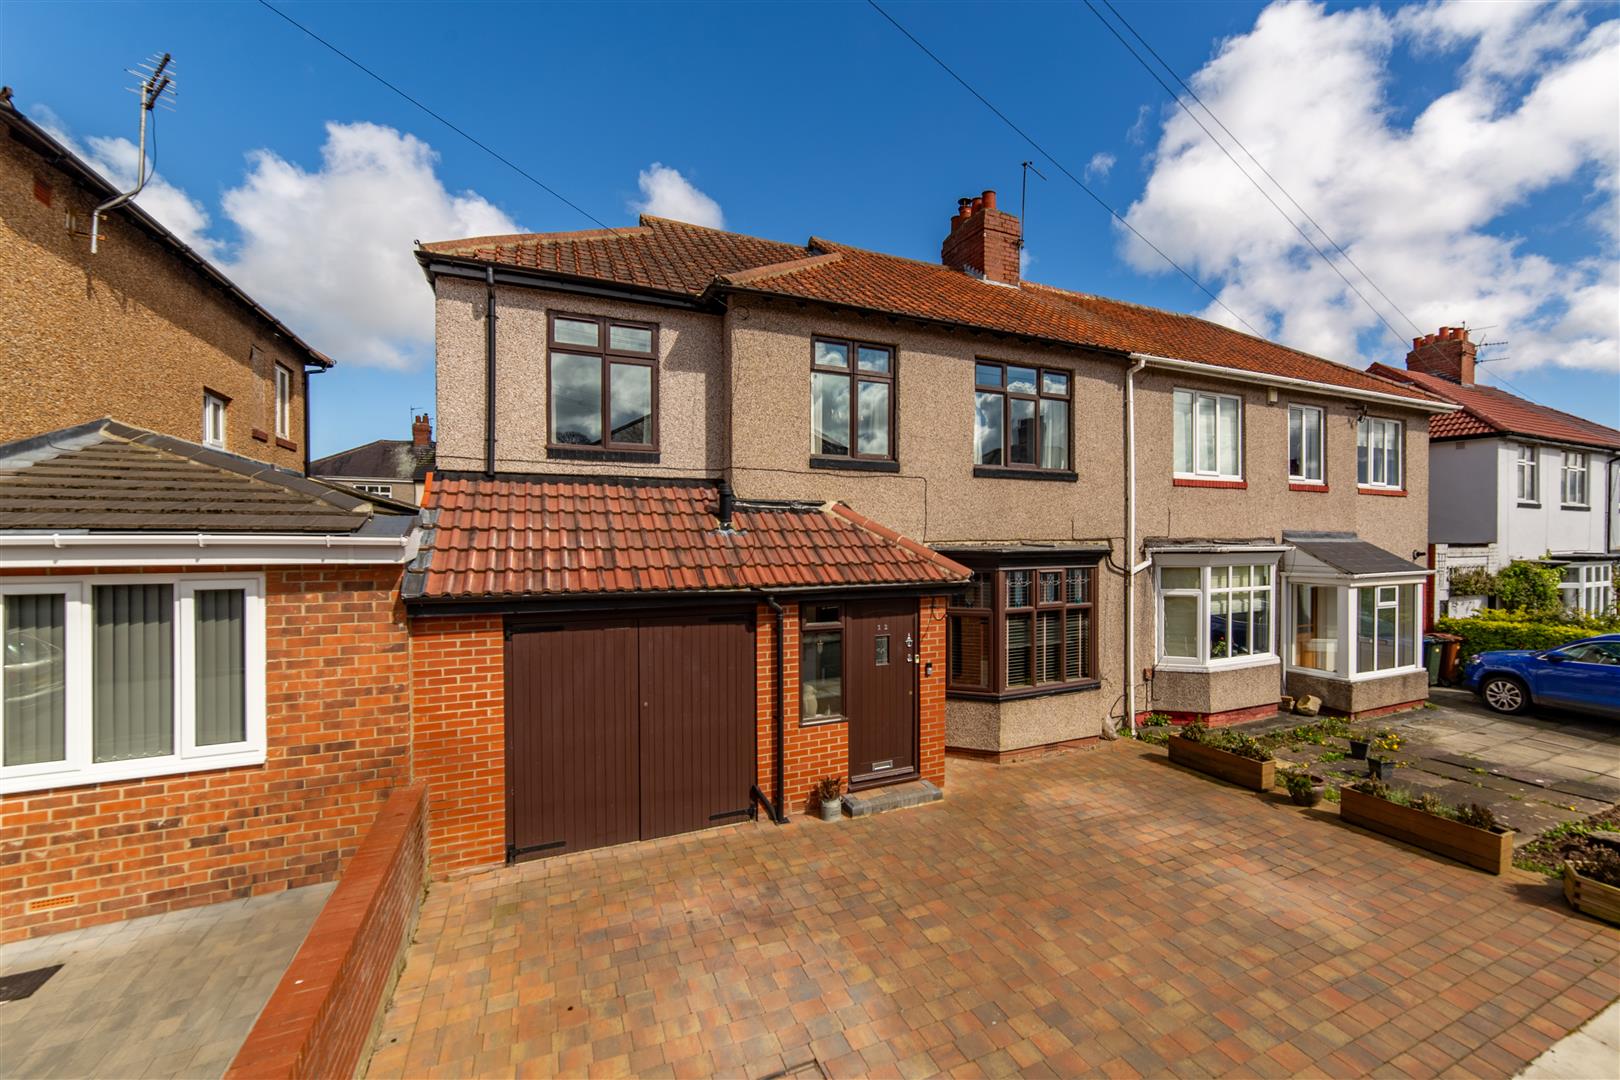 4 bed semi-detached house for sale in Eastlands, Newcastle Upon Tyne, NE7 